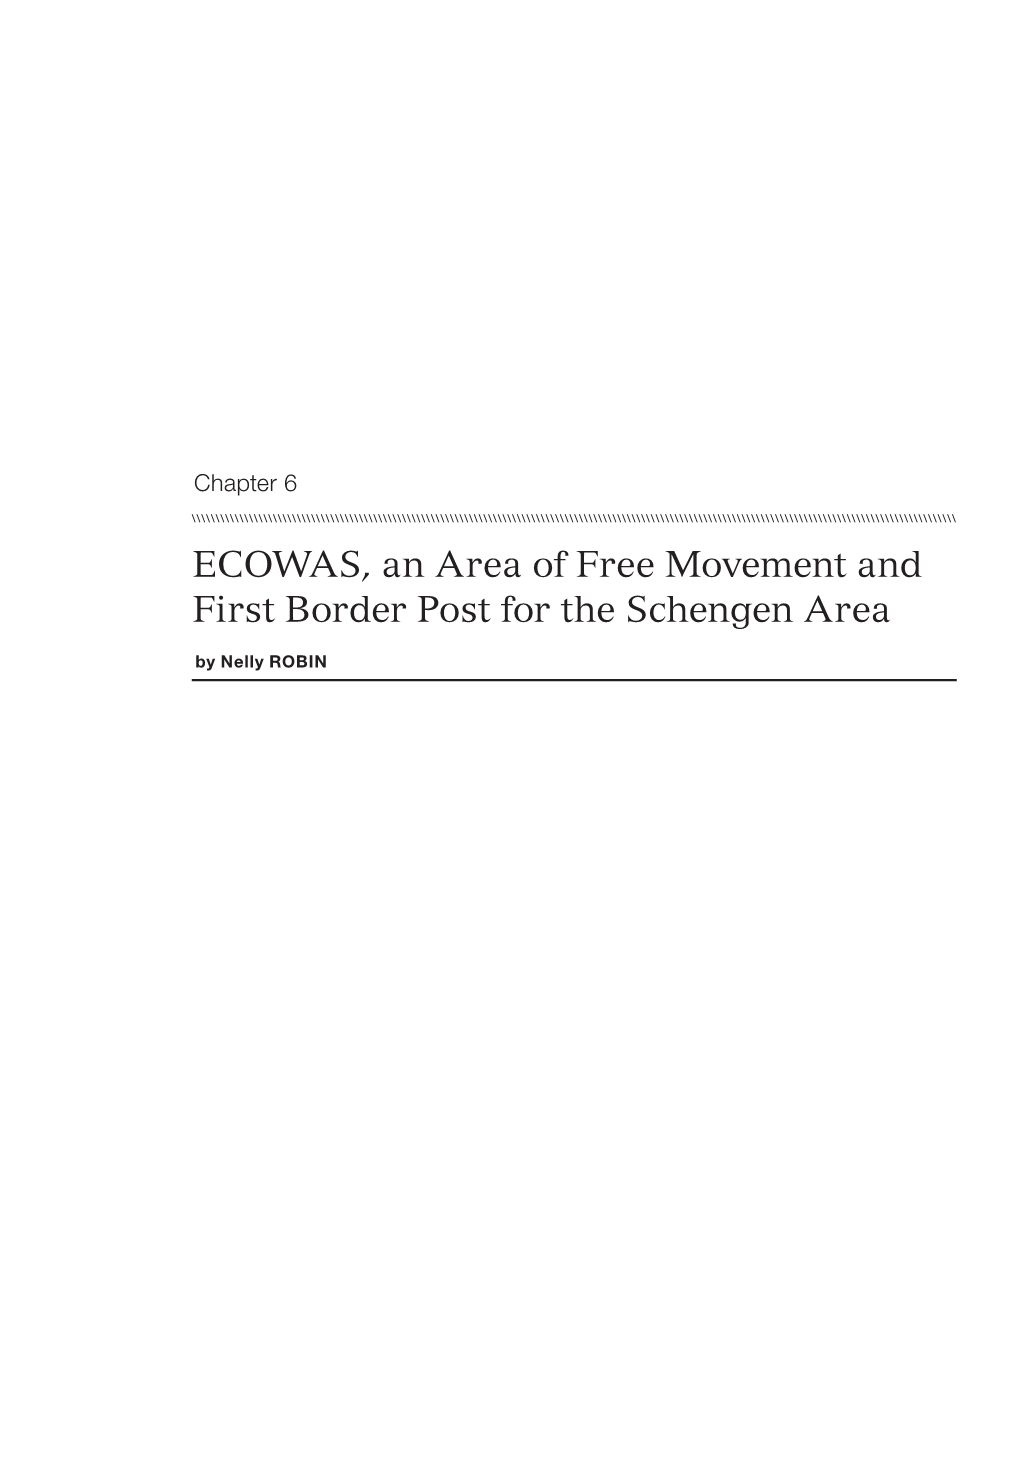 ECOWAS, an Area of Free Movement and First Border Post for the Schengen Area by Nelly ROBIN Chapter 6 ECOWAS, an Area of Free Movement …